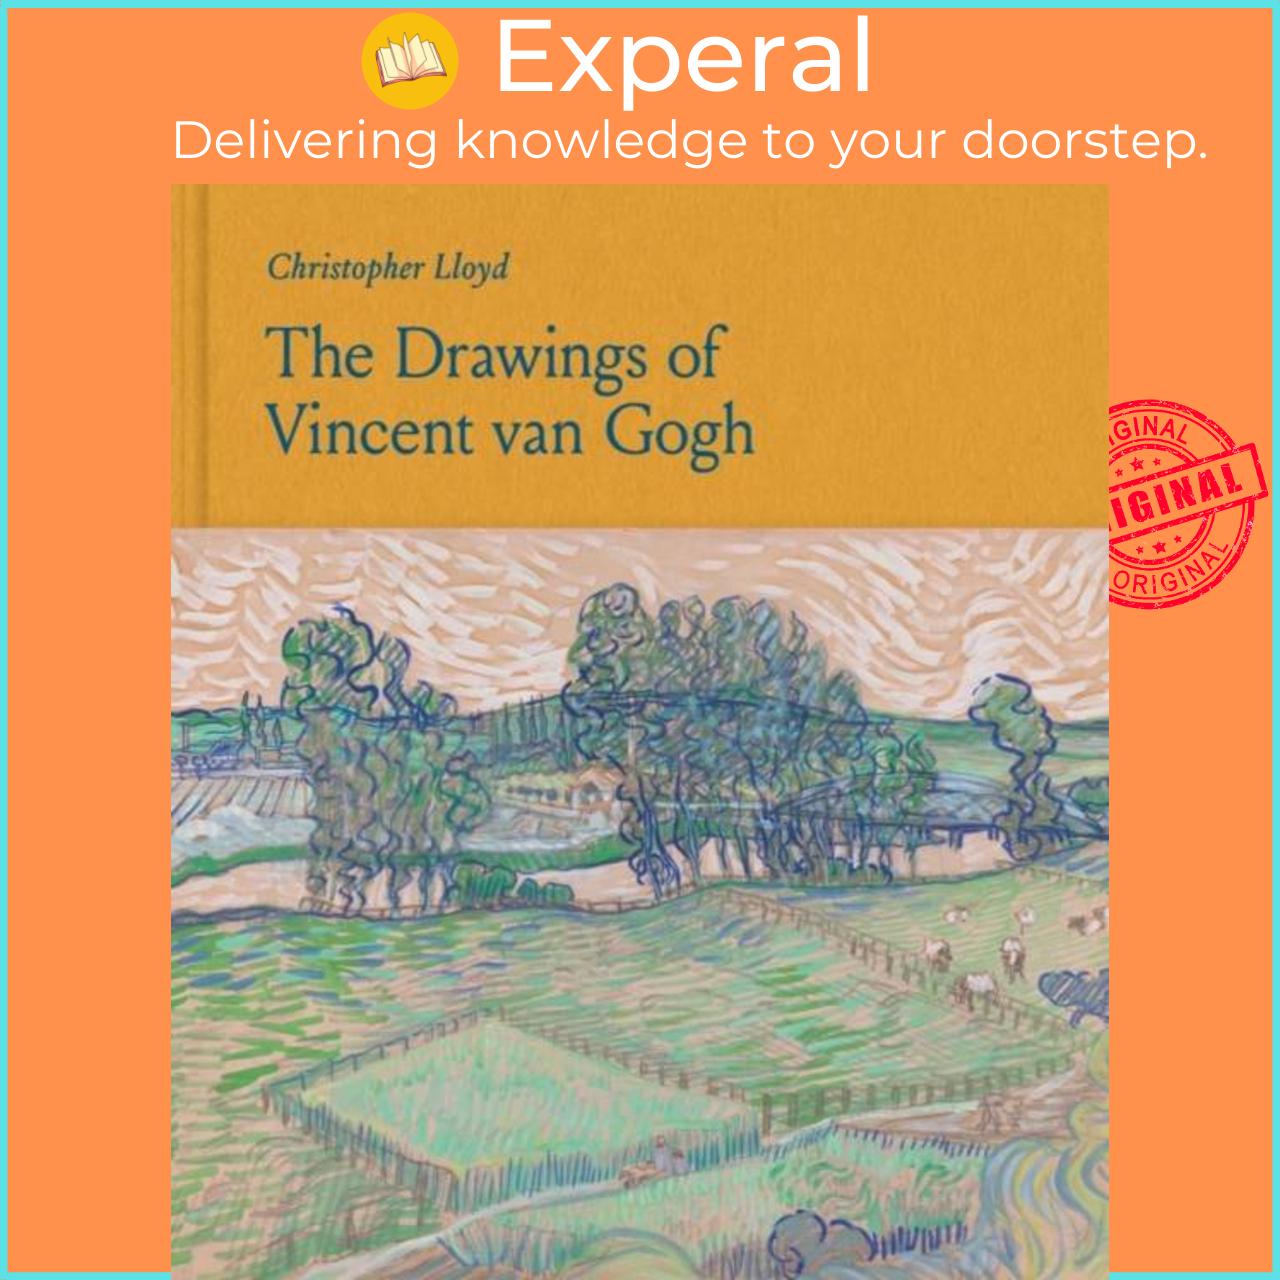 Sách - The Drawings of Vincent van Gogh by Christopher Lloyd (UK edition, hardcover)